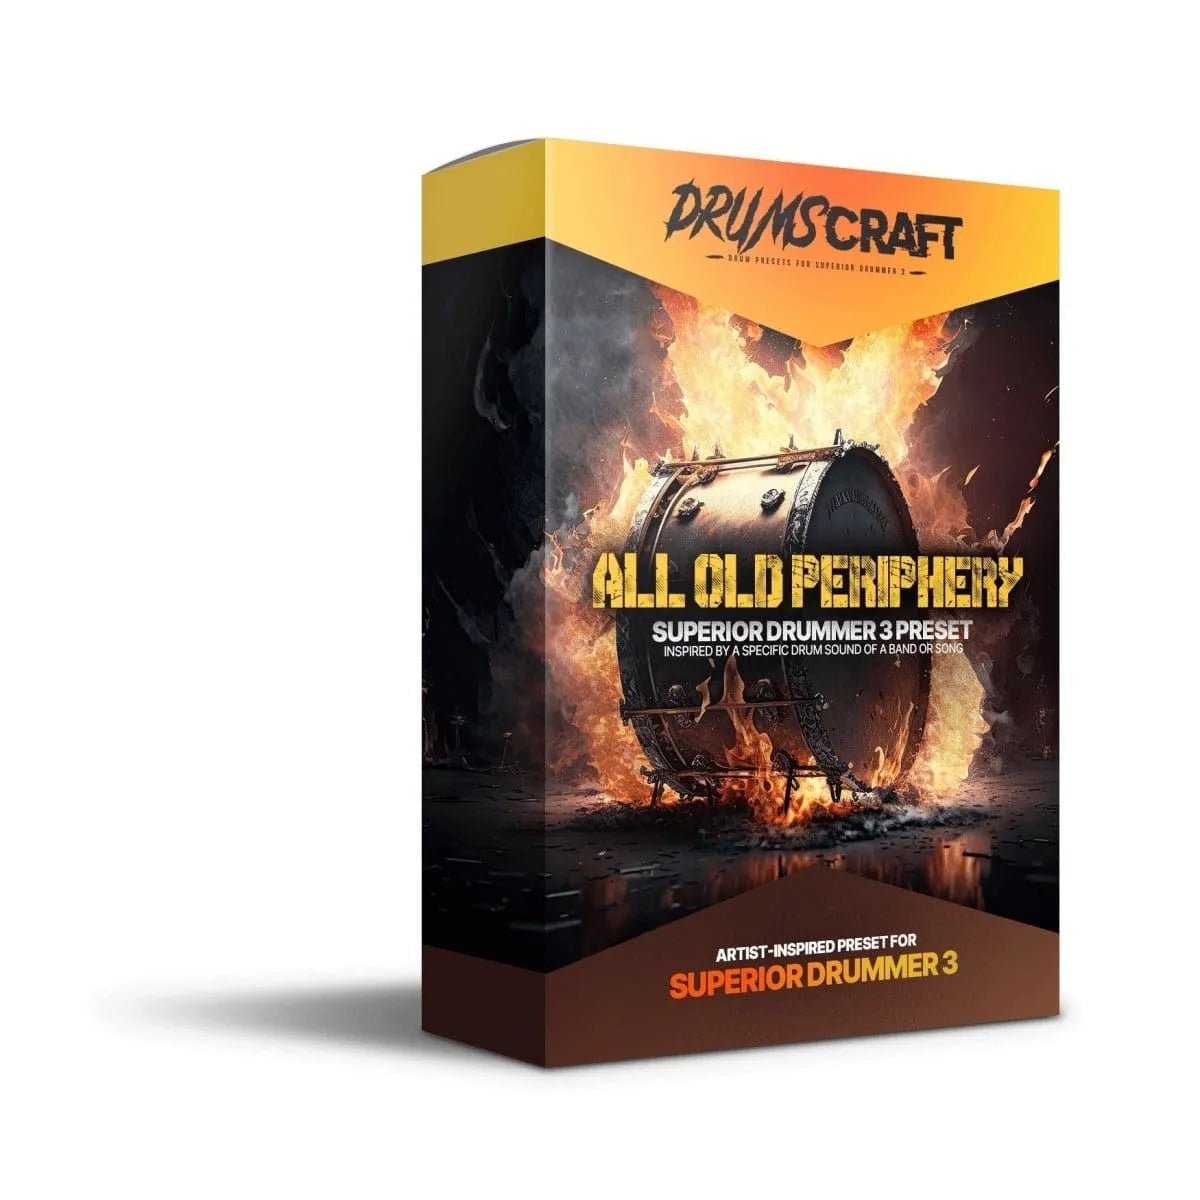 All Old Periphery - Superior Drummer 3 Presets - Develop Device Studio